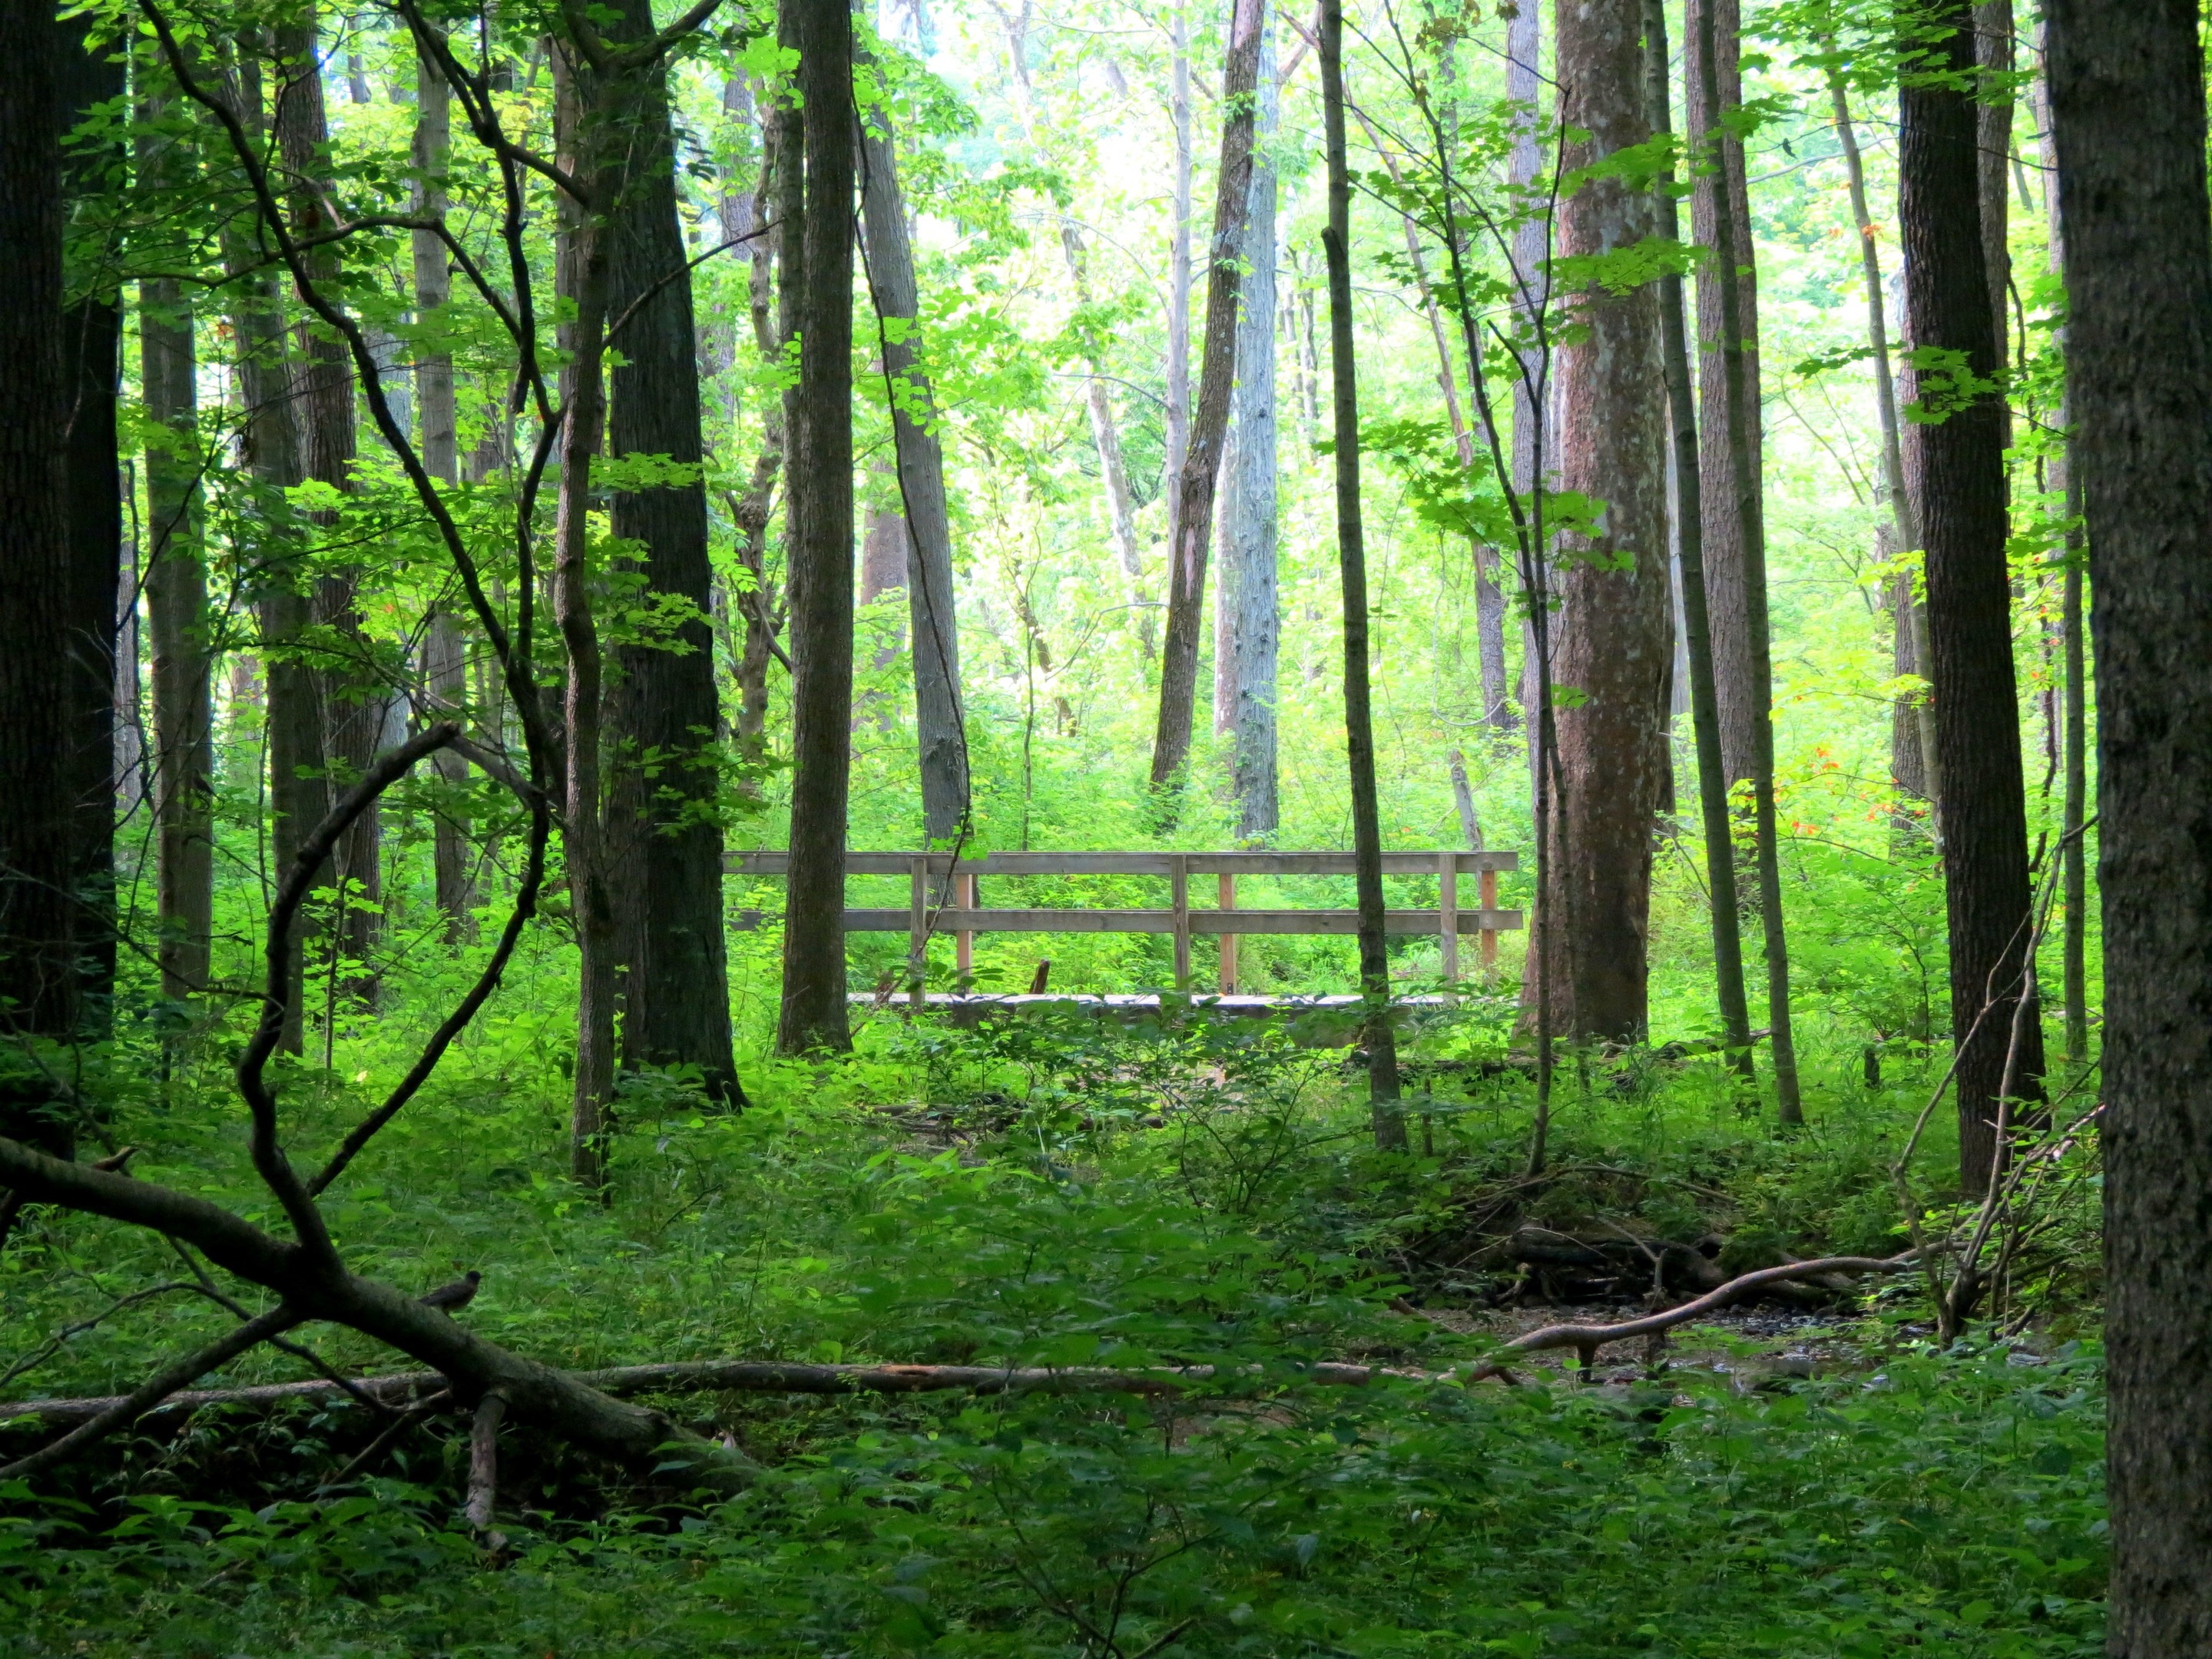 Ritchey Woods Nature Preserve, Fishers IN